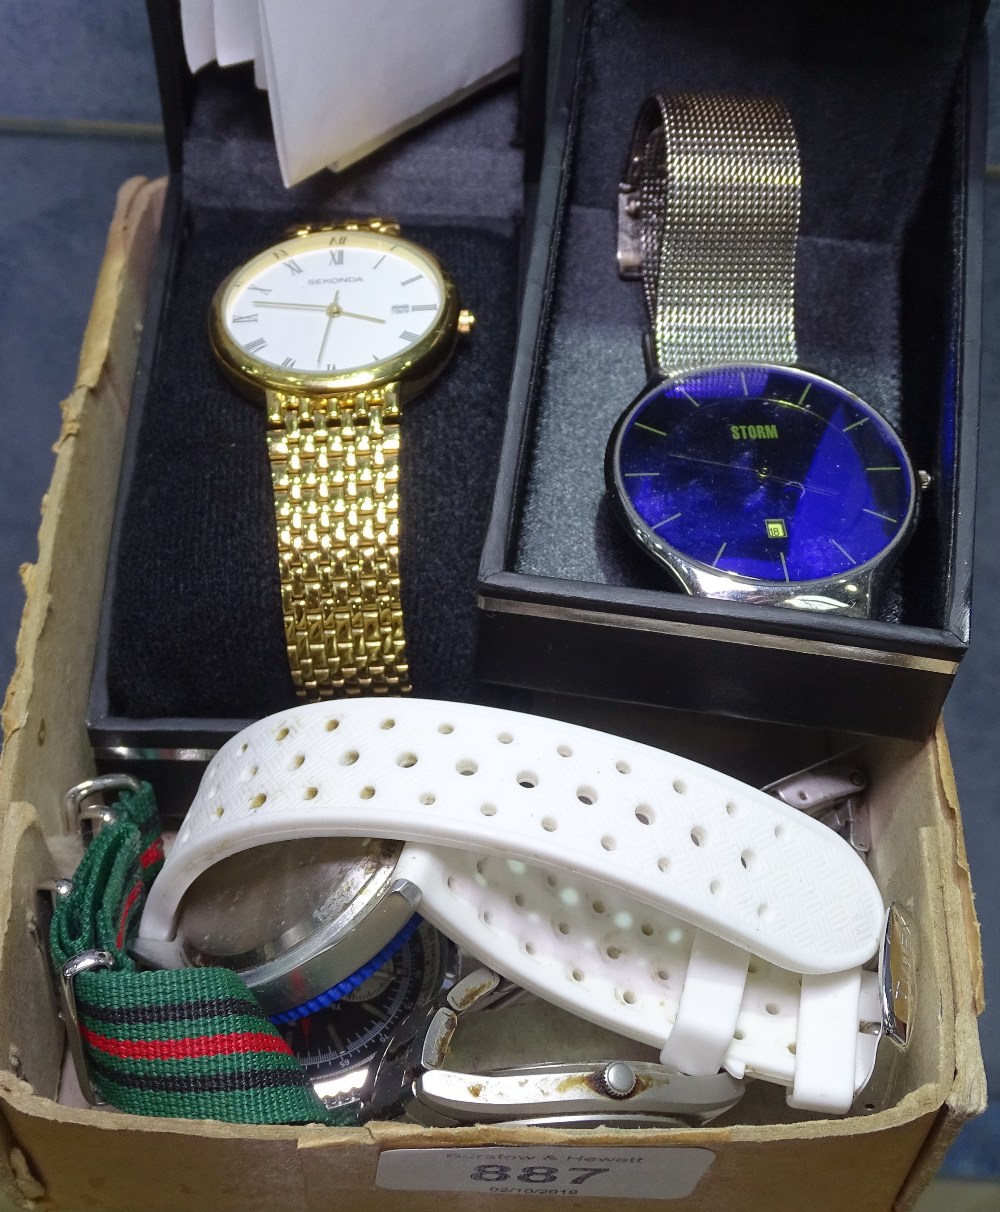 A collection of wristwatches, to include a Seiko, Storm, Timex, and a military style wristwatch